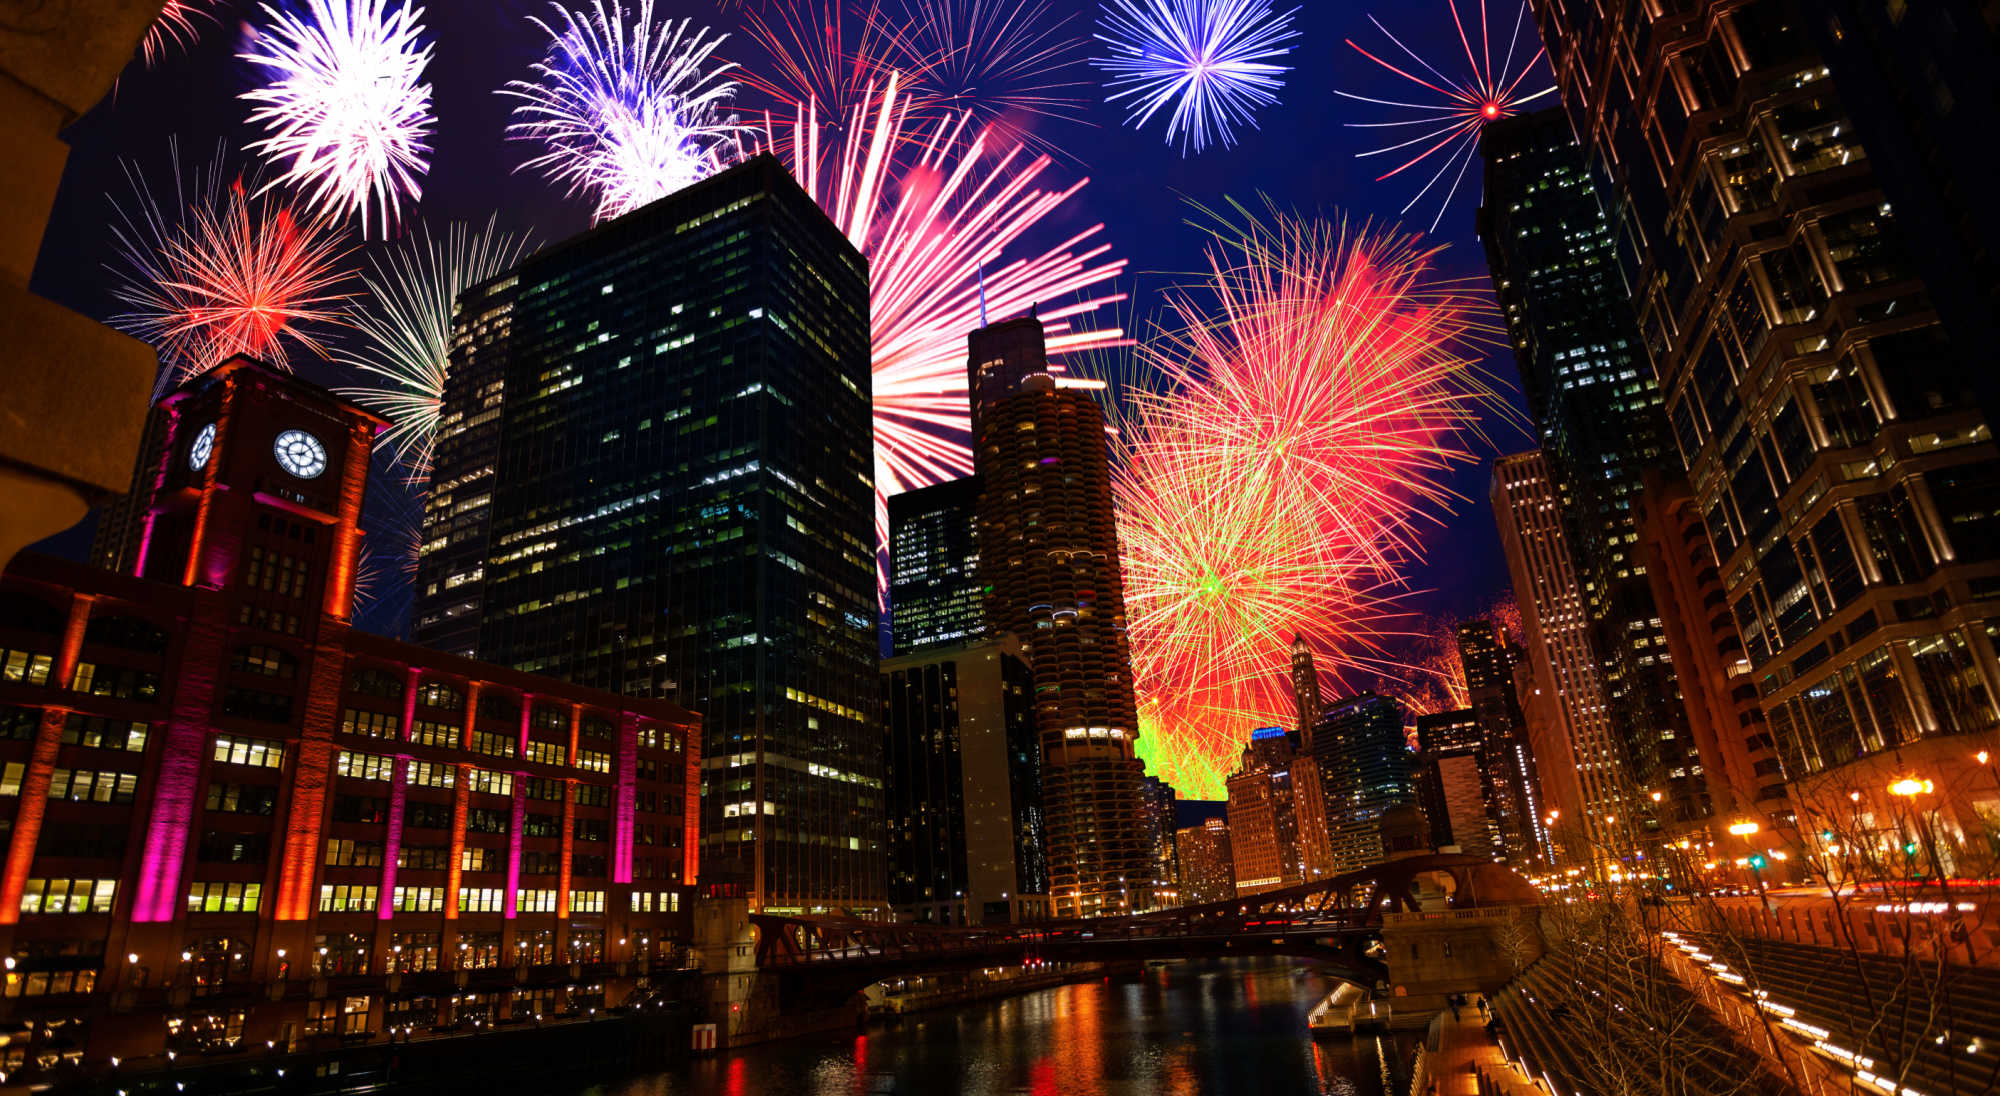 Attorneys of River North wish you a Happy 4th